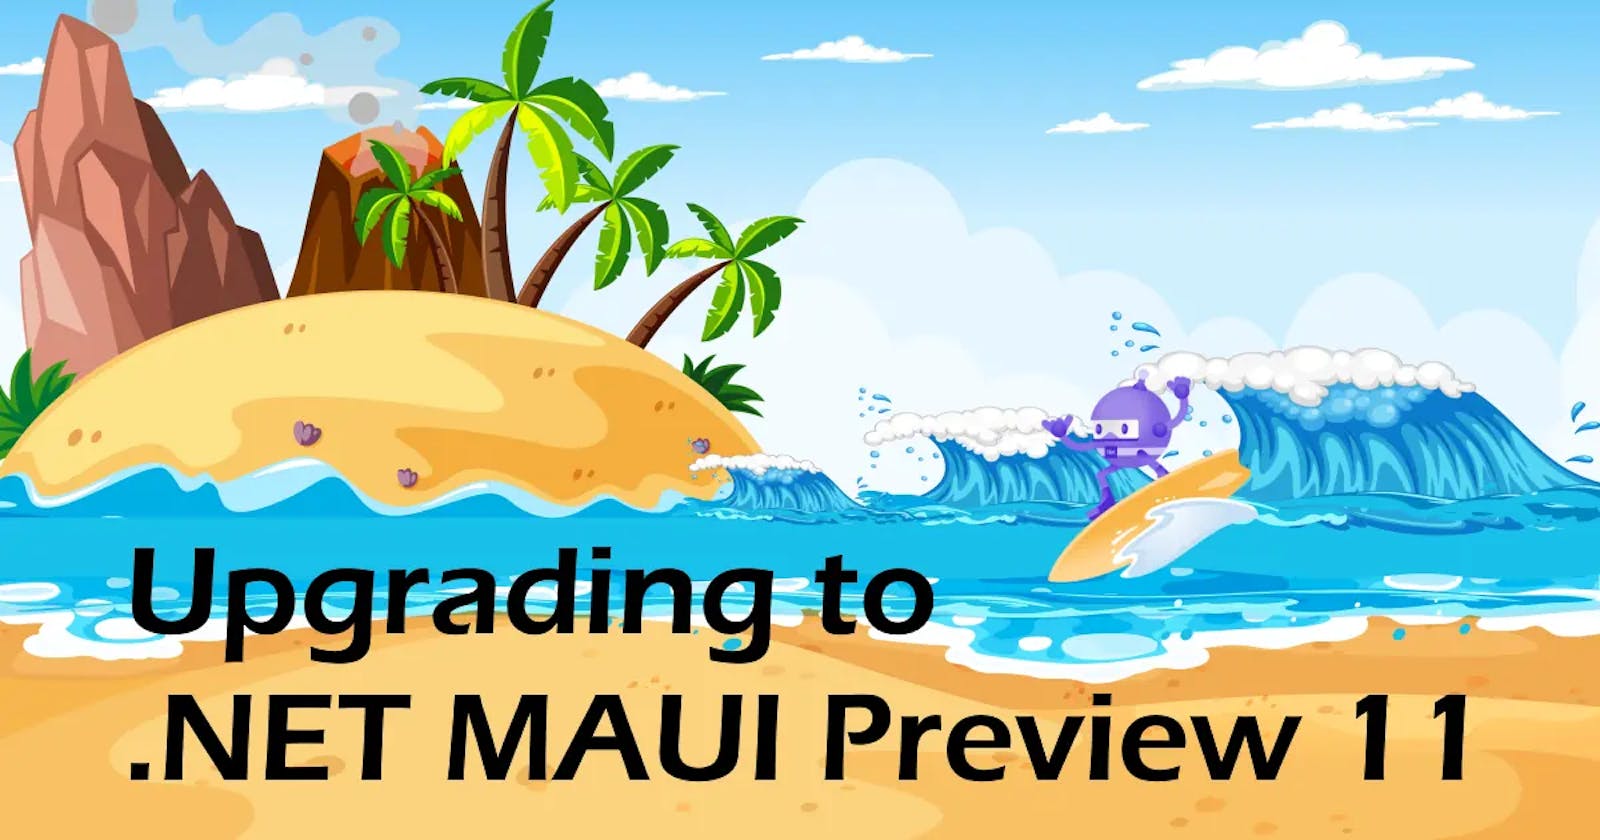 Upgrading to .NET MAUI Preview 11